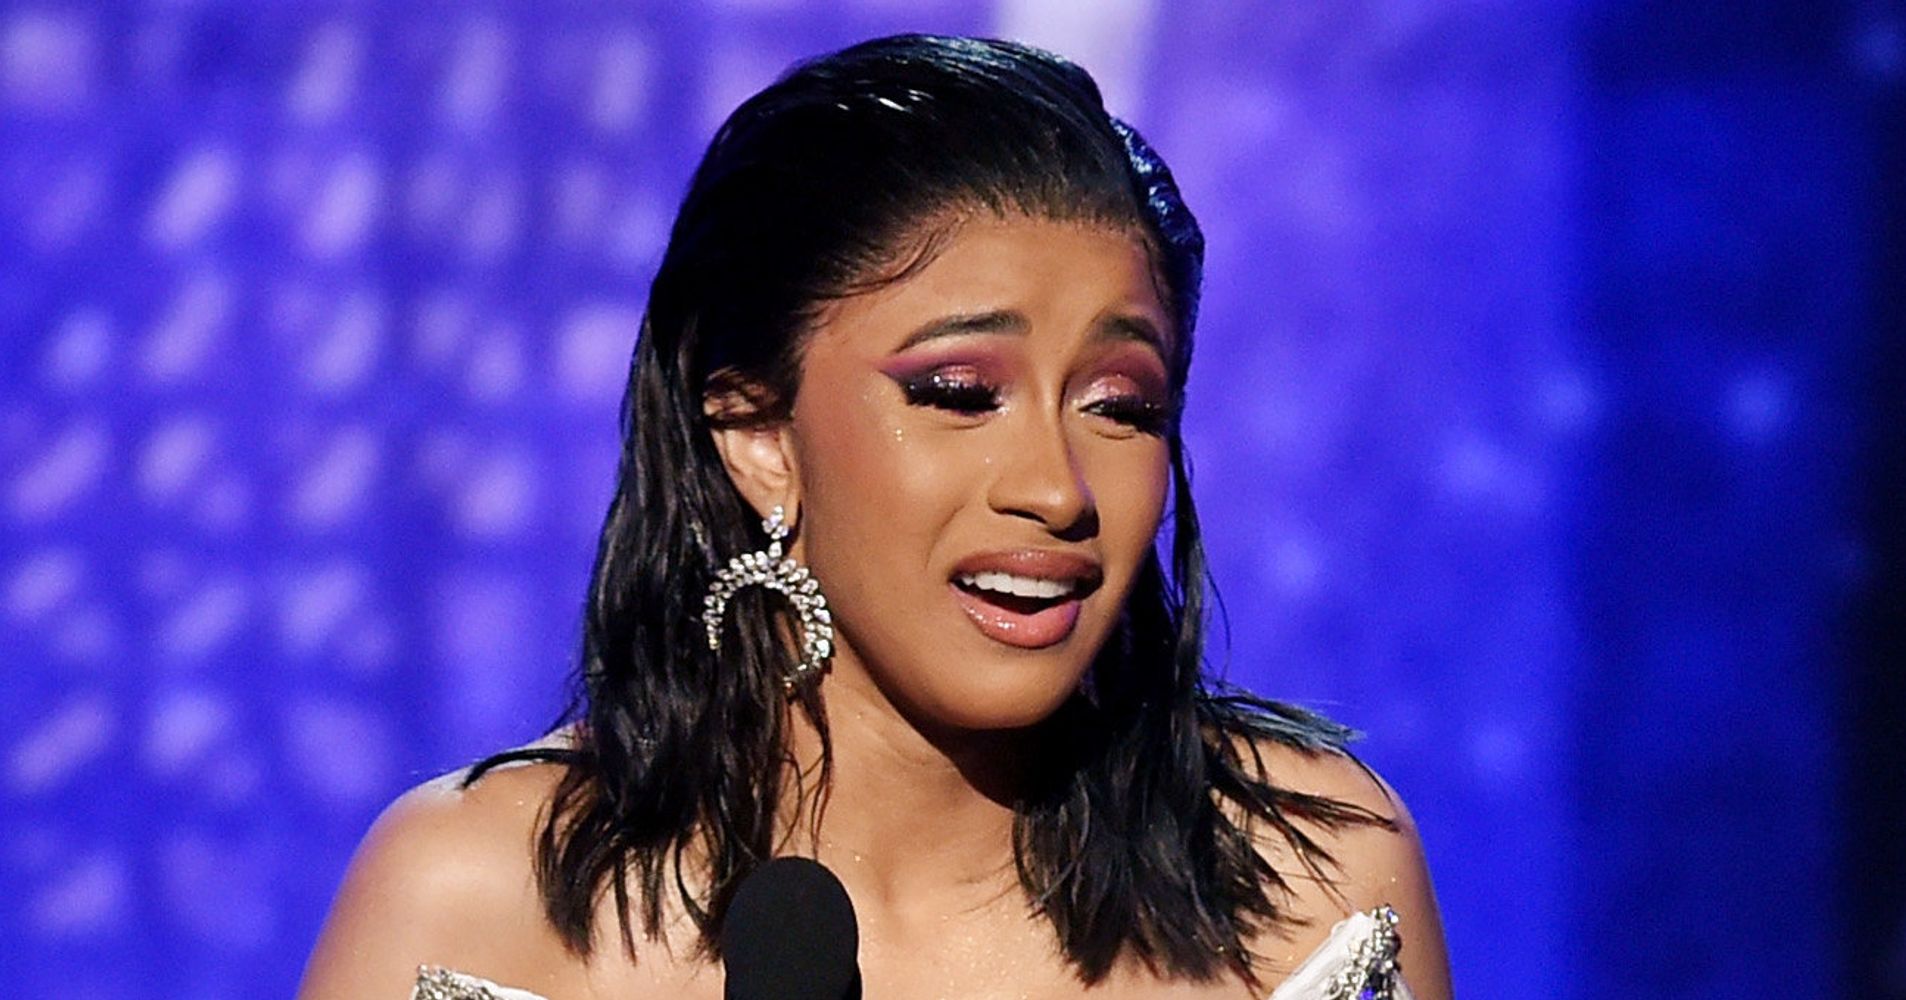 Cardi B Becomes First Solo Woman To Win Grammy Award For Best Rap Album | HuffPost